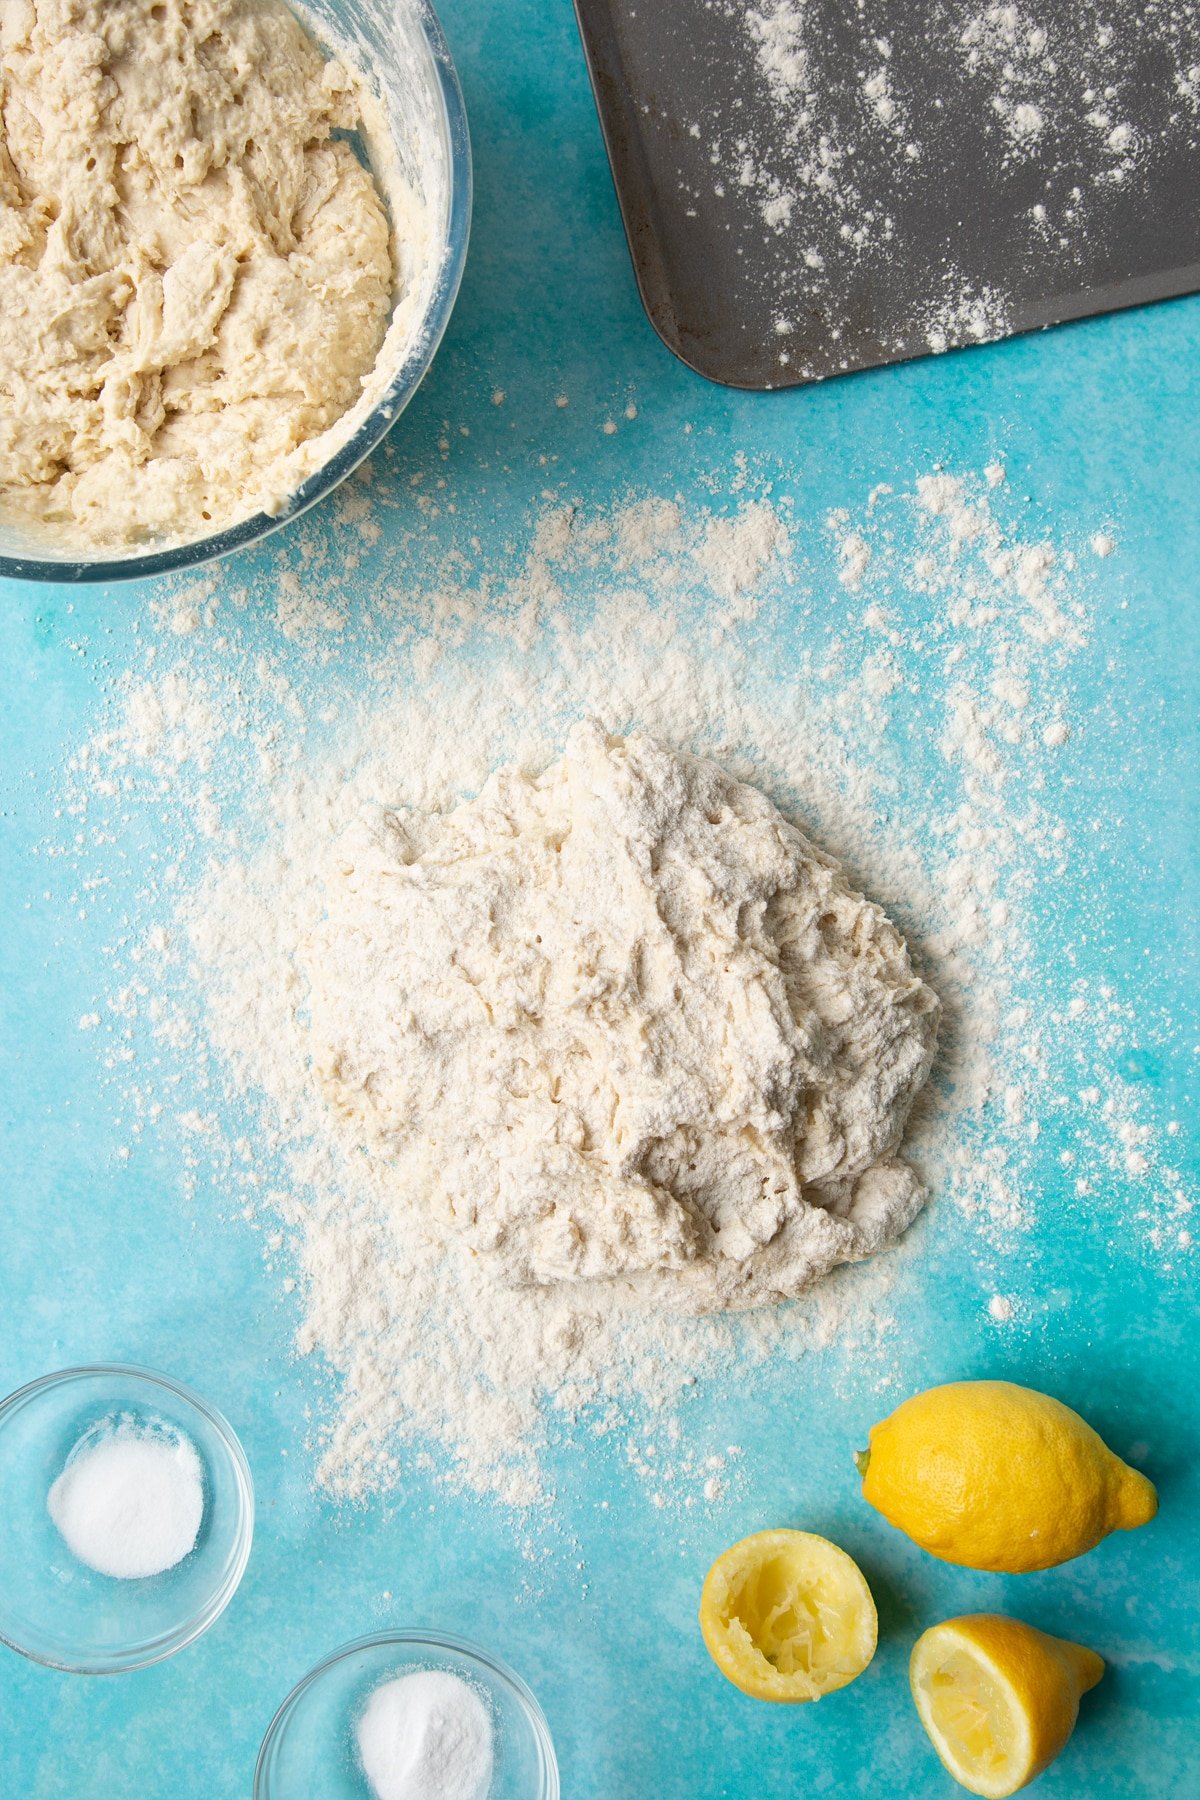 A wet dough on a floured surface, floured on top, surrounded by ingredients to make vegan soda bread.